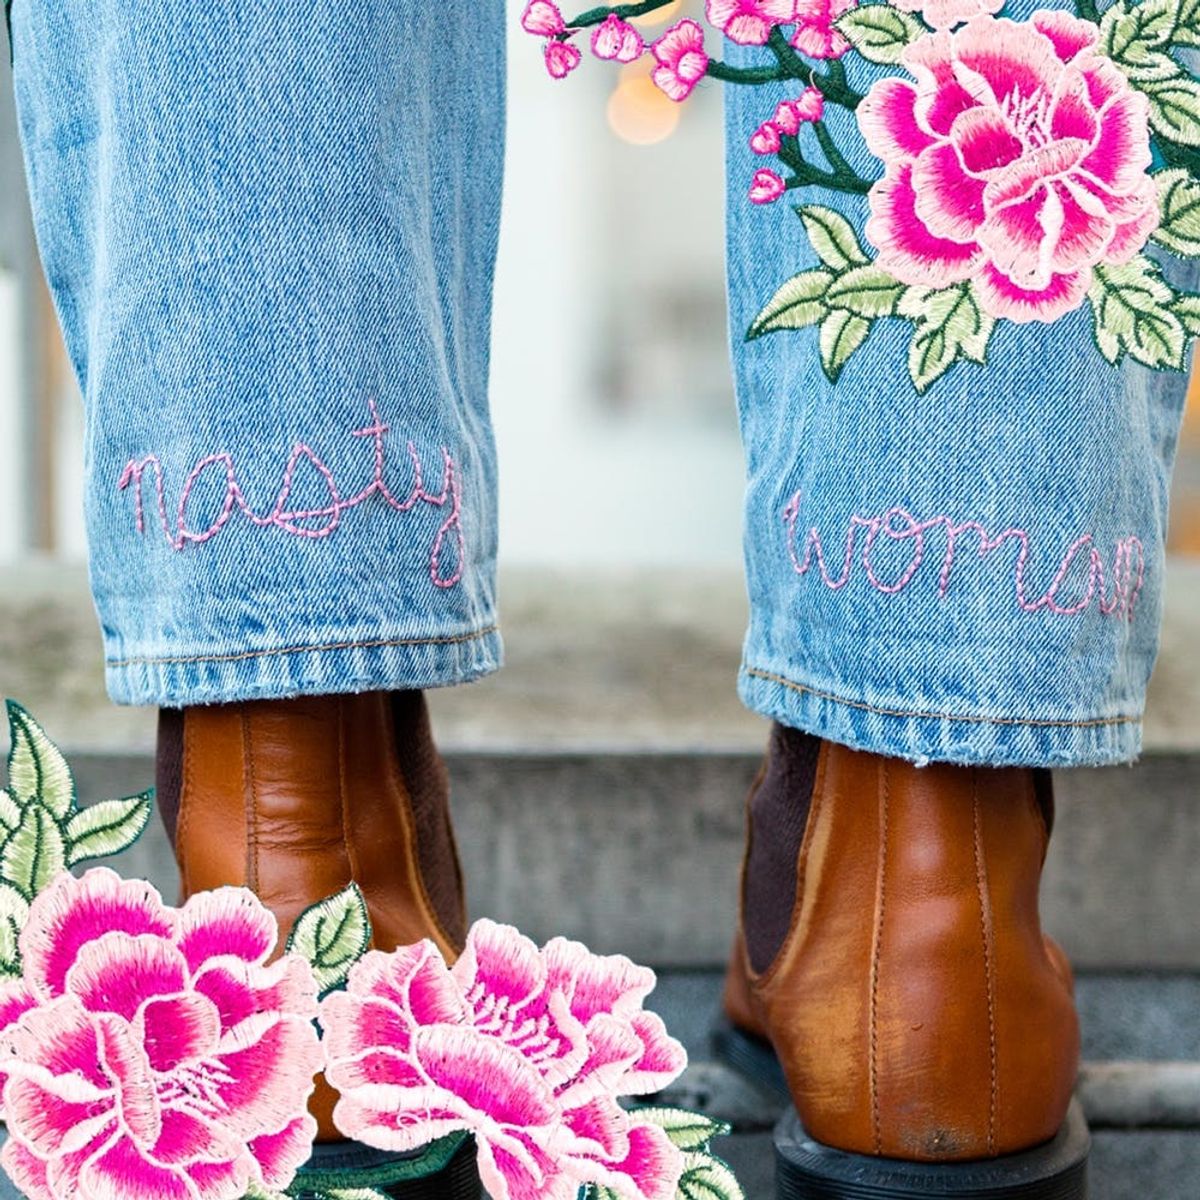 Add Feminist Flair to These DIY Embroidered Jeans